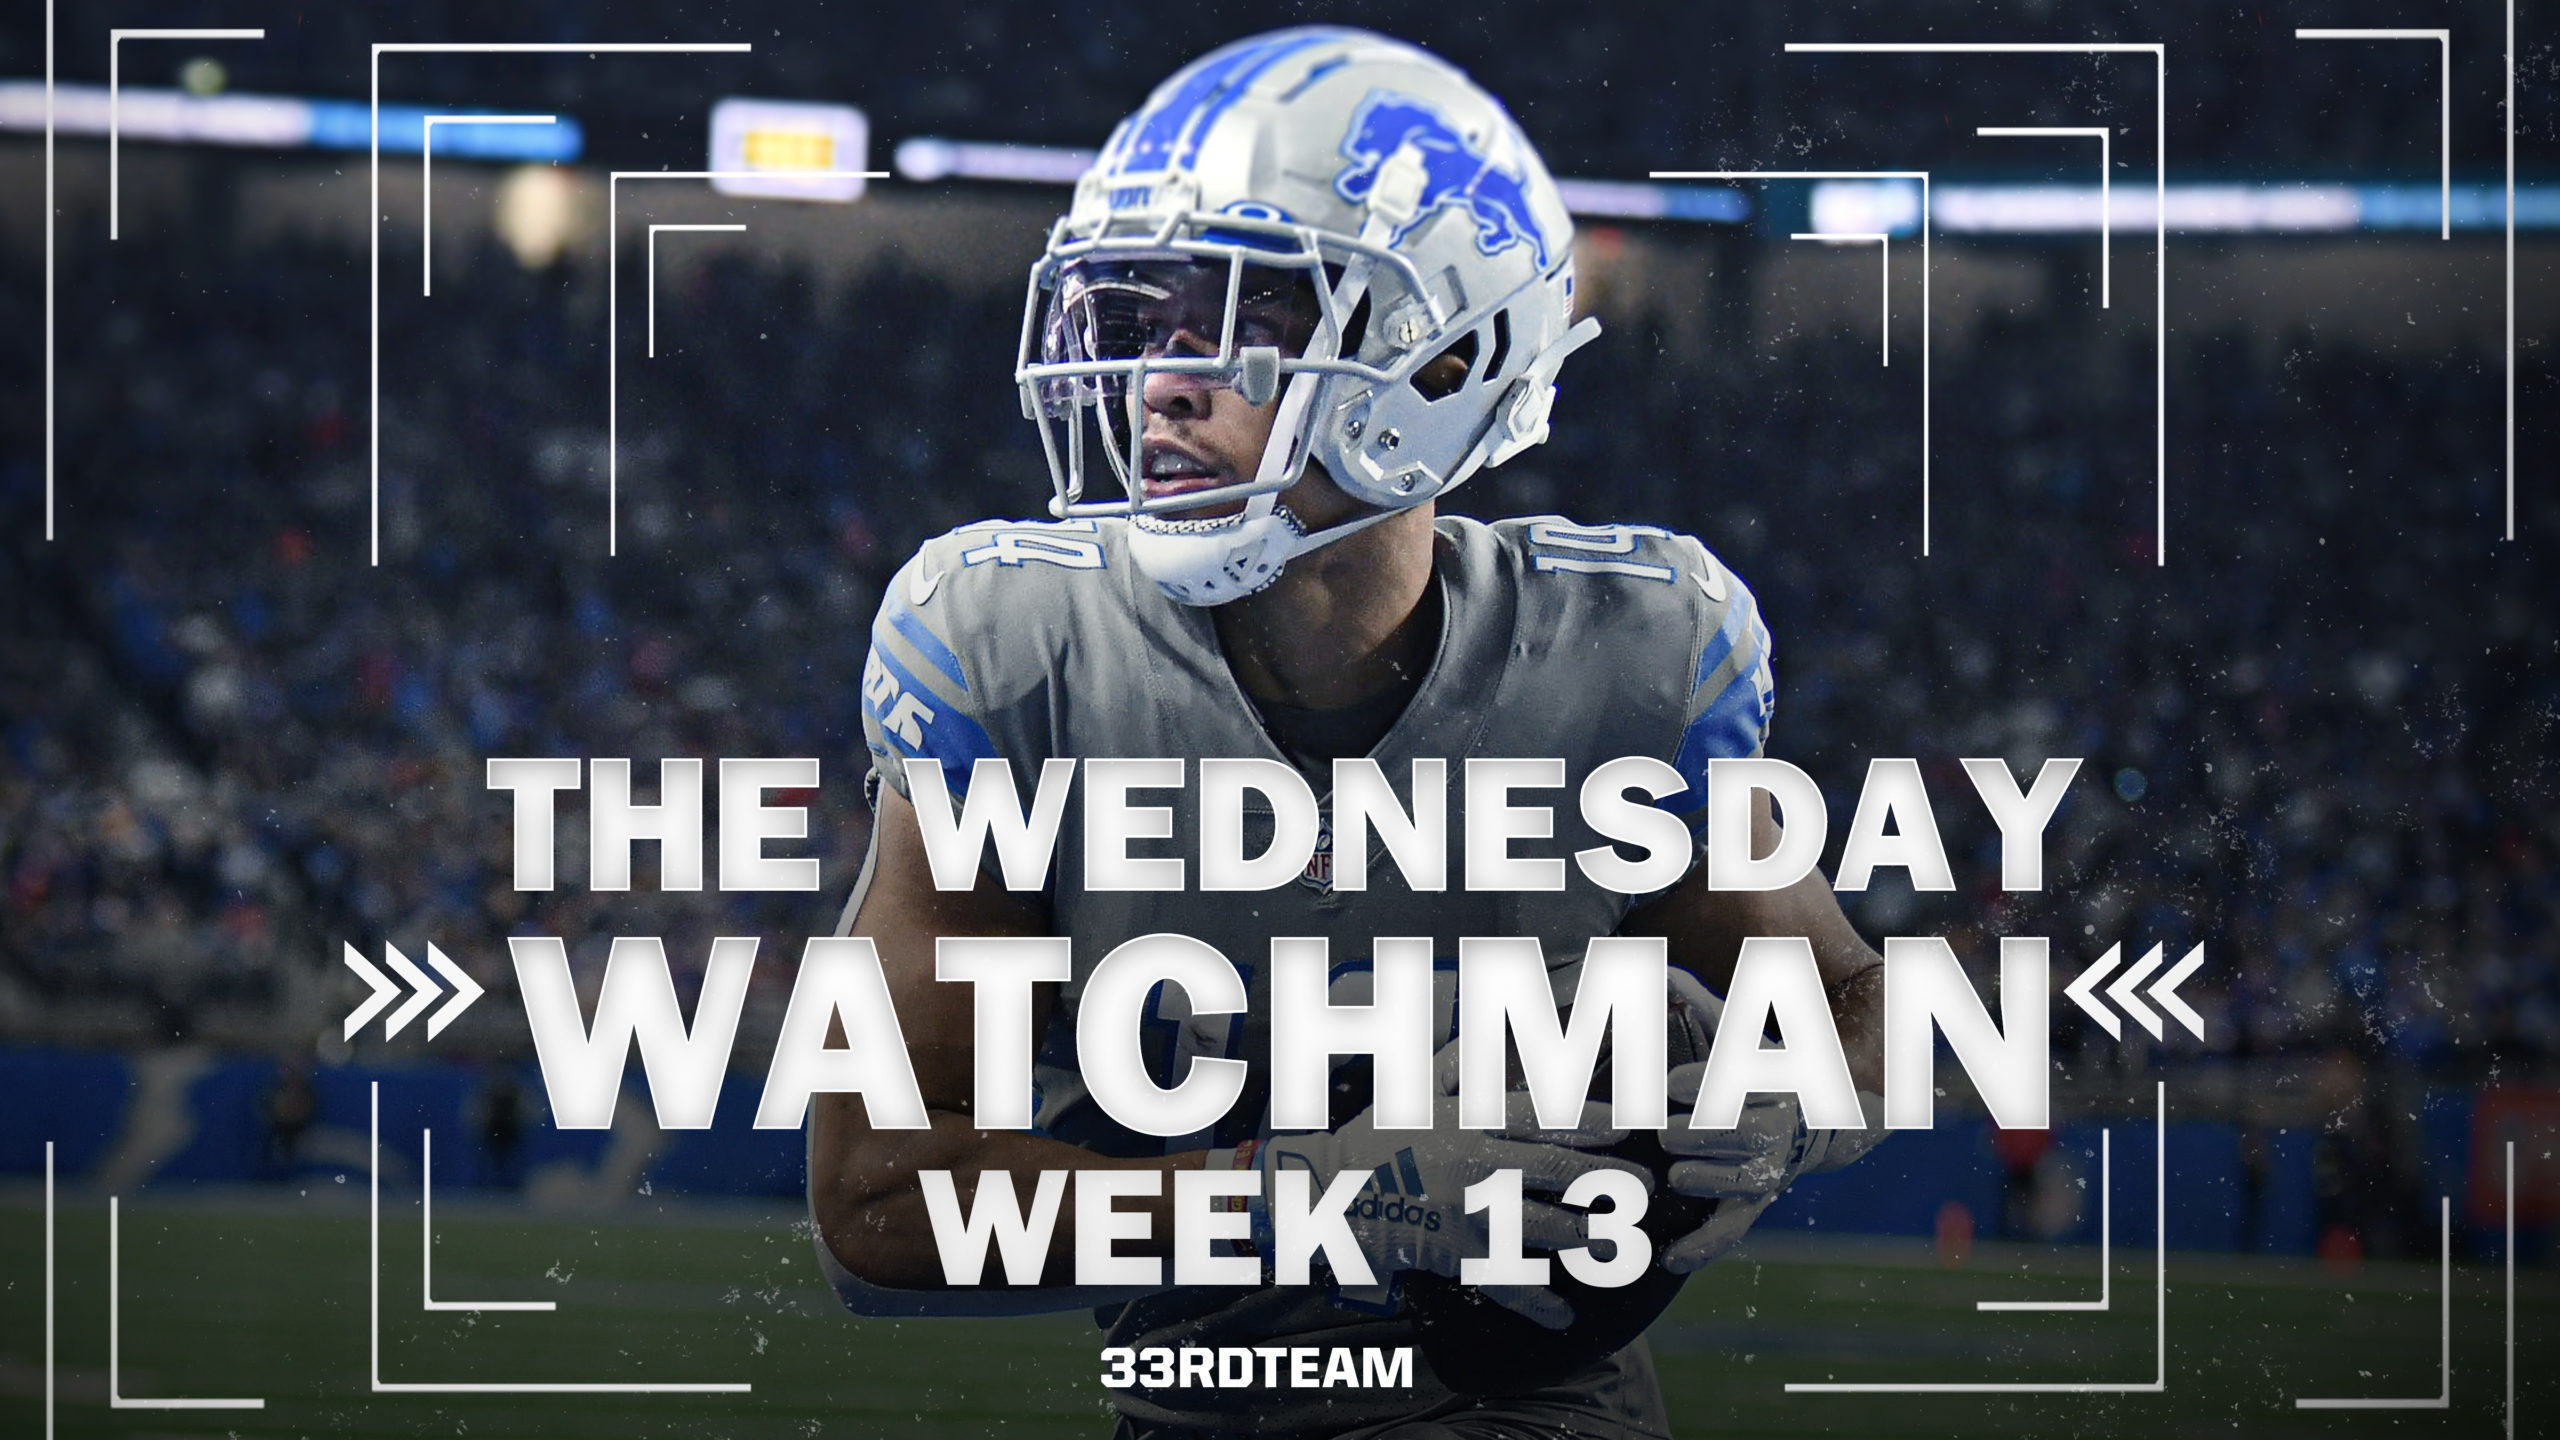 The Wednesday Watchman: NFL Week 13 Betting, DFS and Fantasy Information to Know